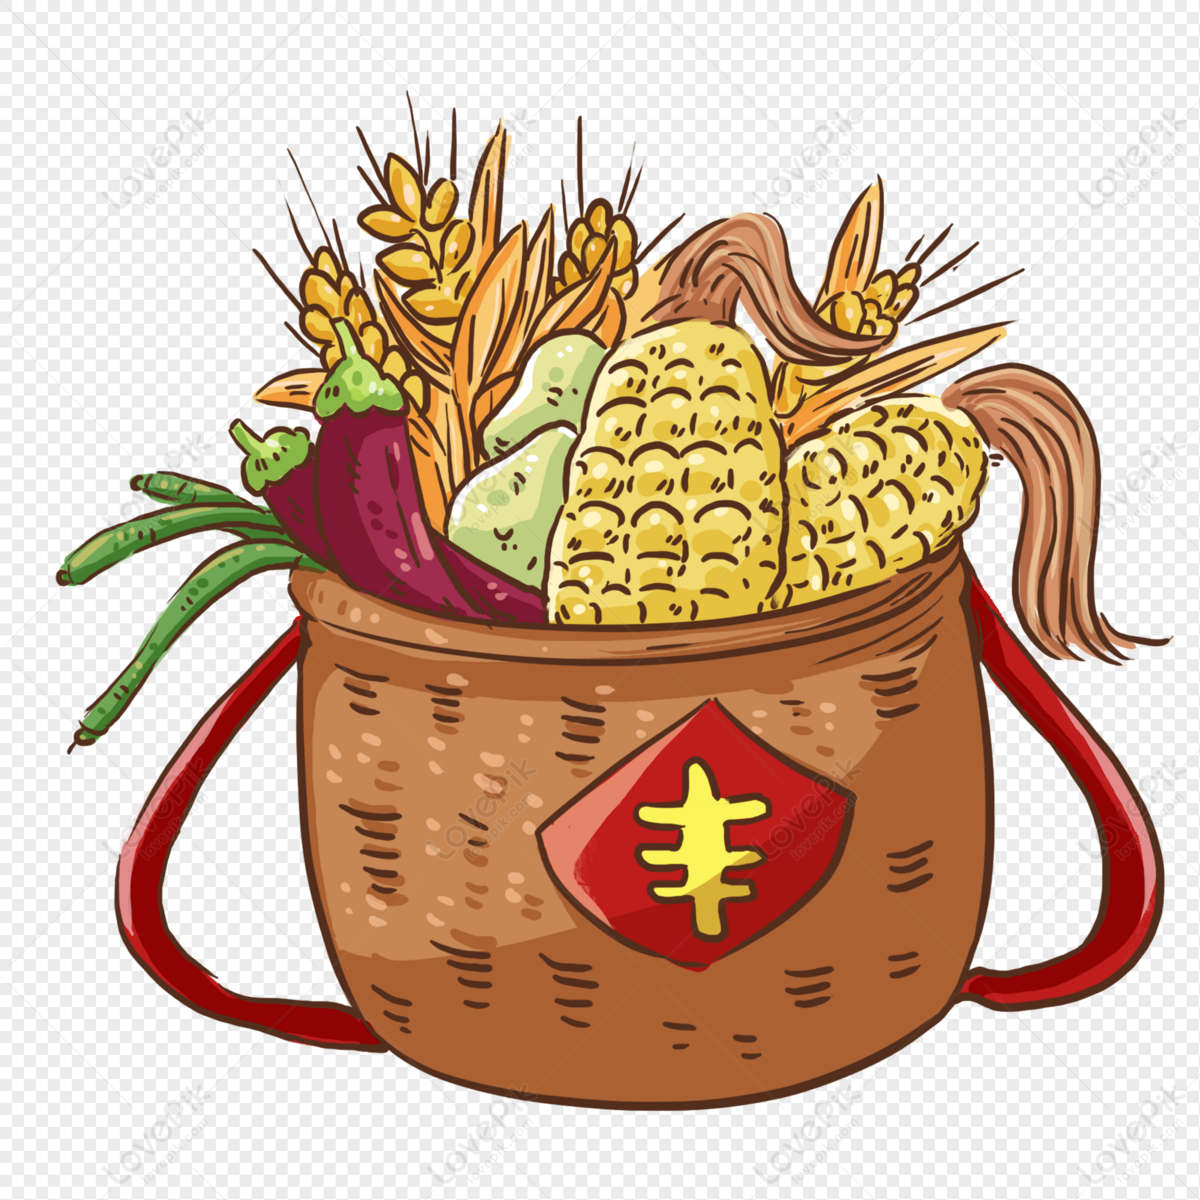 Autumn Harvest PNG Transparent Background And Clipart Image For Free ...